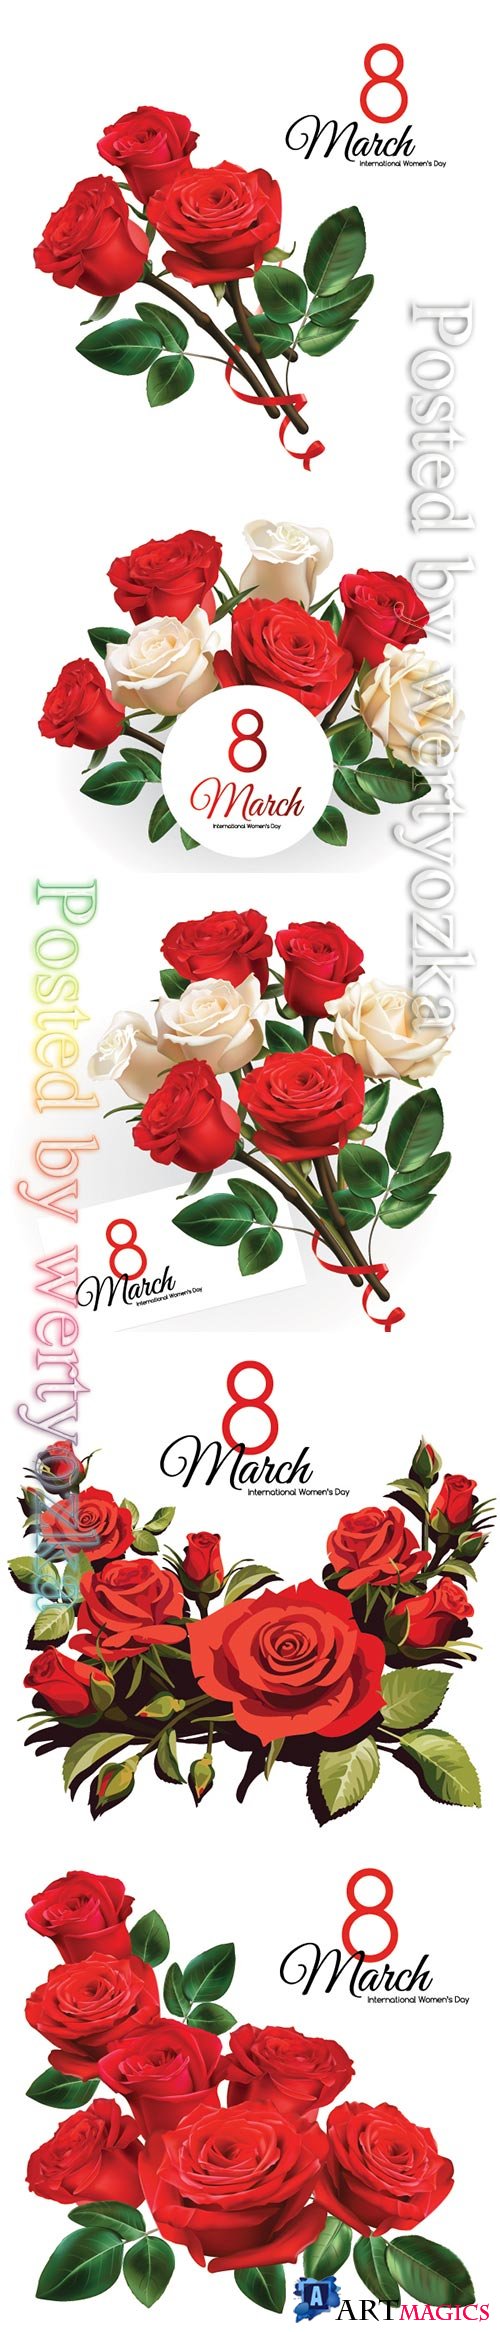 8 March Women's Day greeting card template with red roses